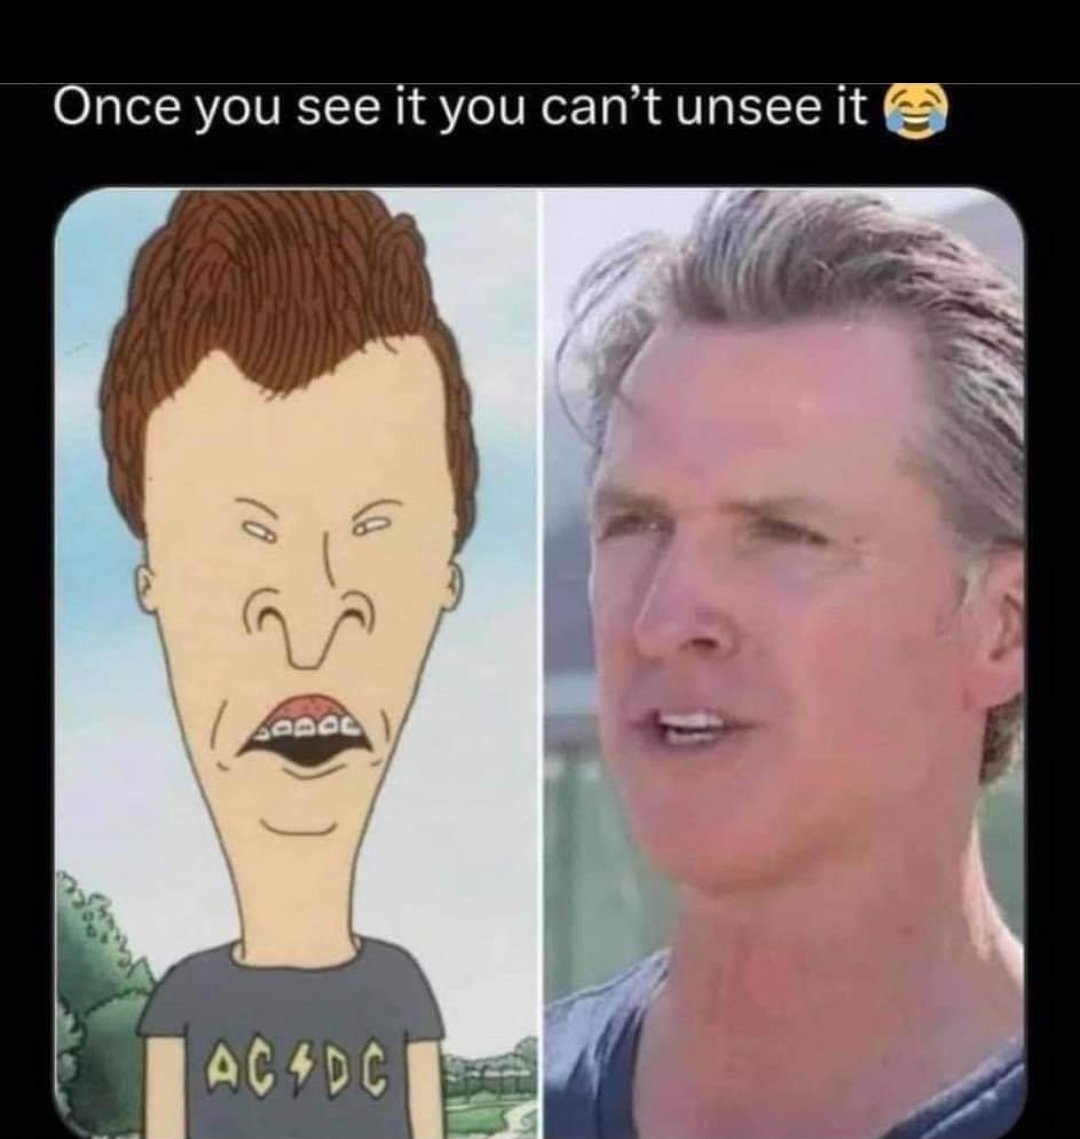 This sure explains why Gavin Newsom is the WORSE Governor in our country. No wonder California is so F'd up! @GavinNewsom @CAgovernor